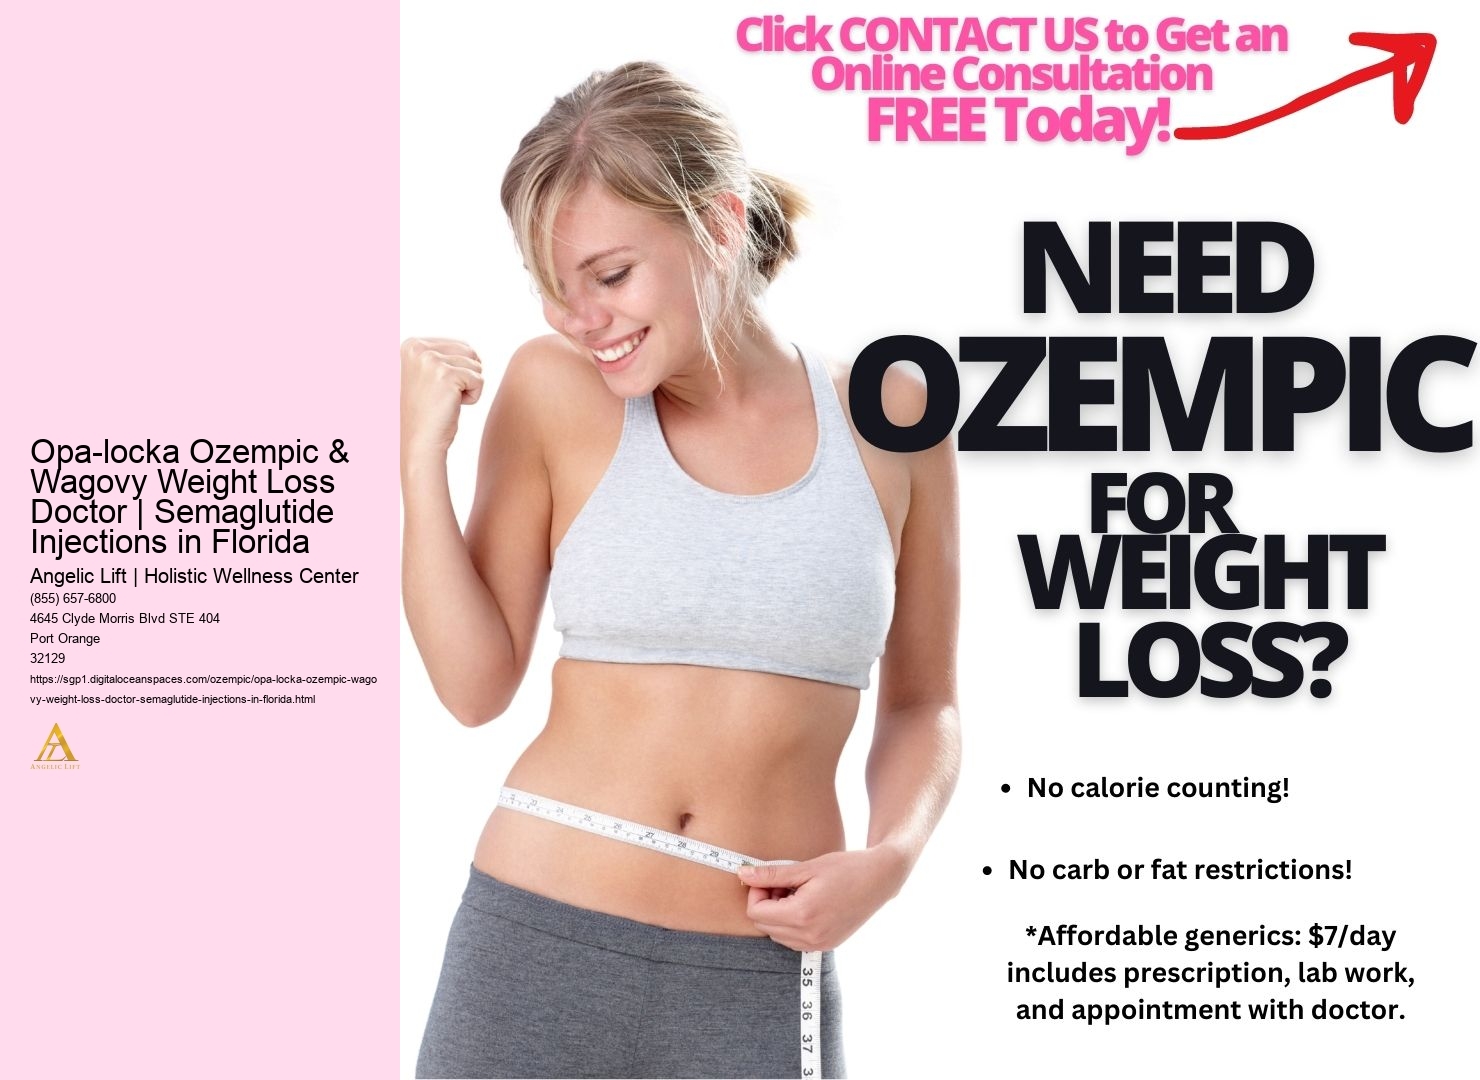 Opa-locka Ozempic & Wagovy Weight Loss Doctor | Semaglutide Injections in Florida